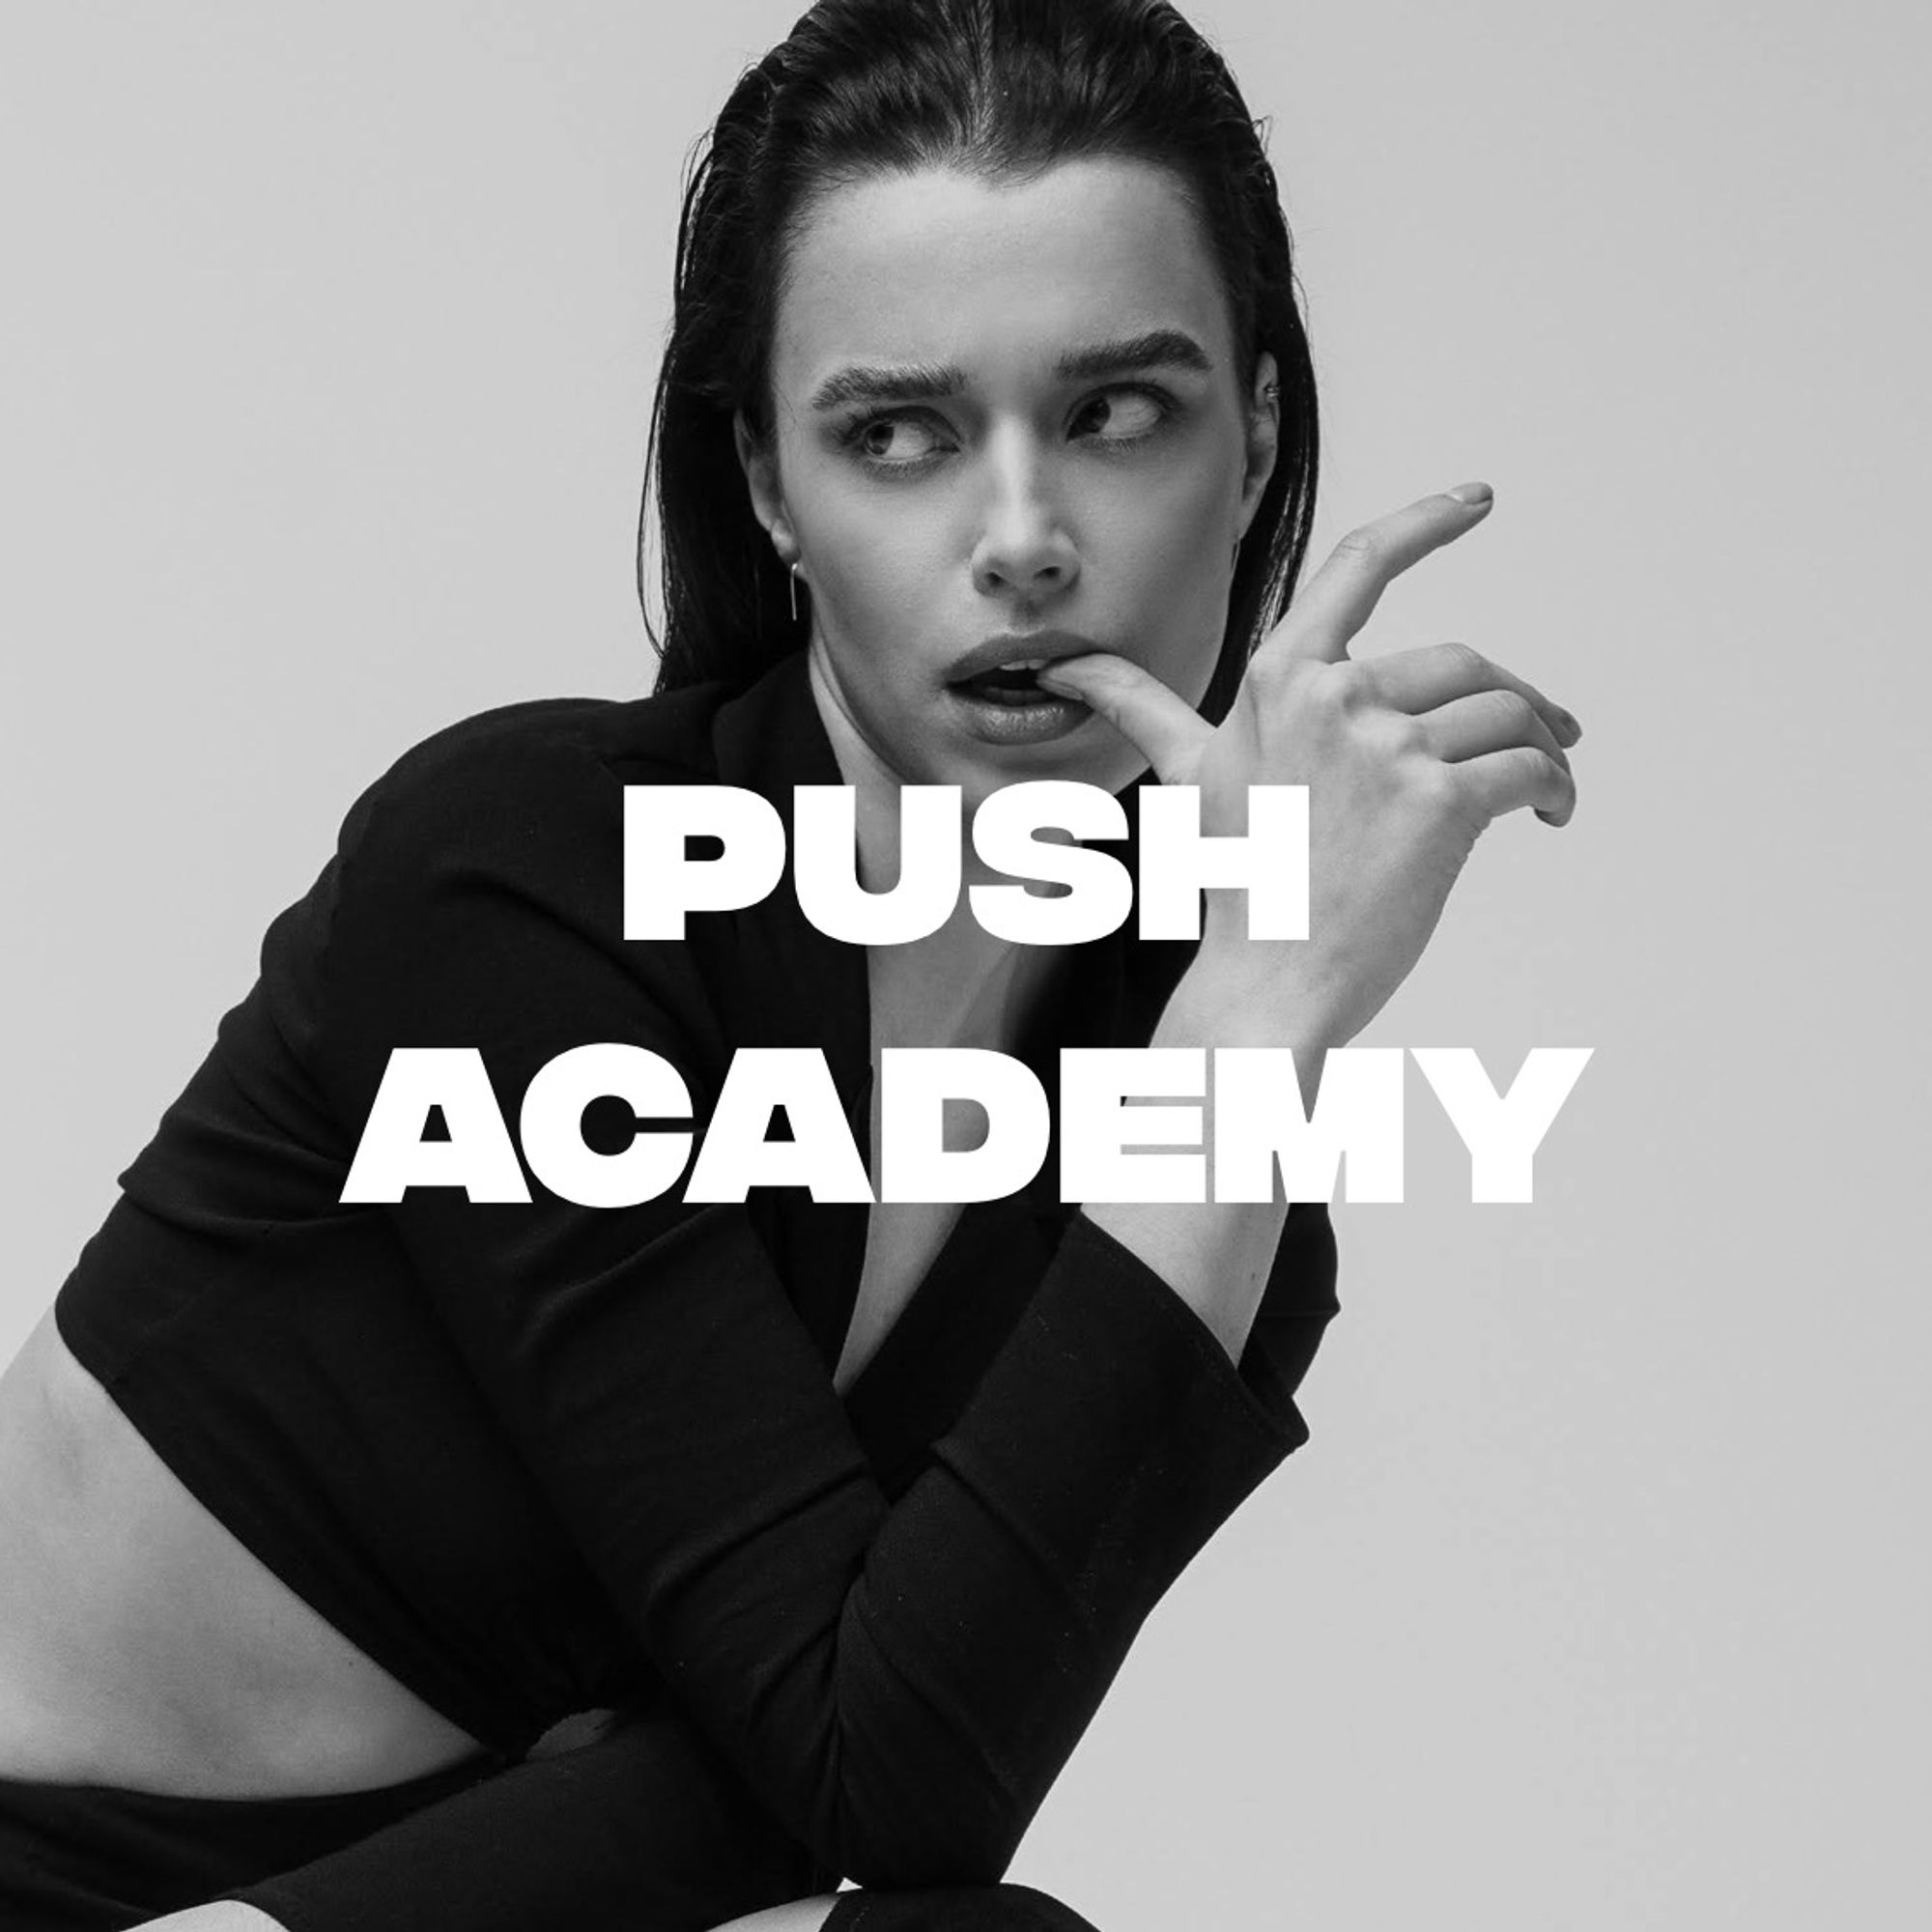 Push Academy to become a model or influencer